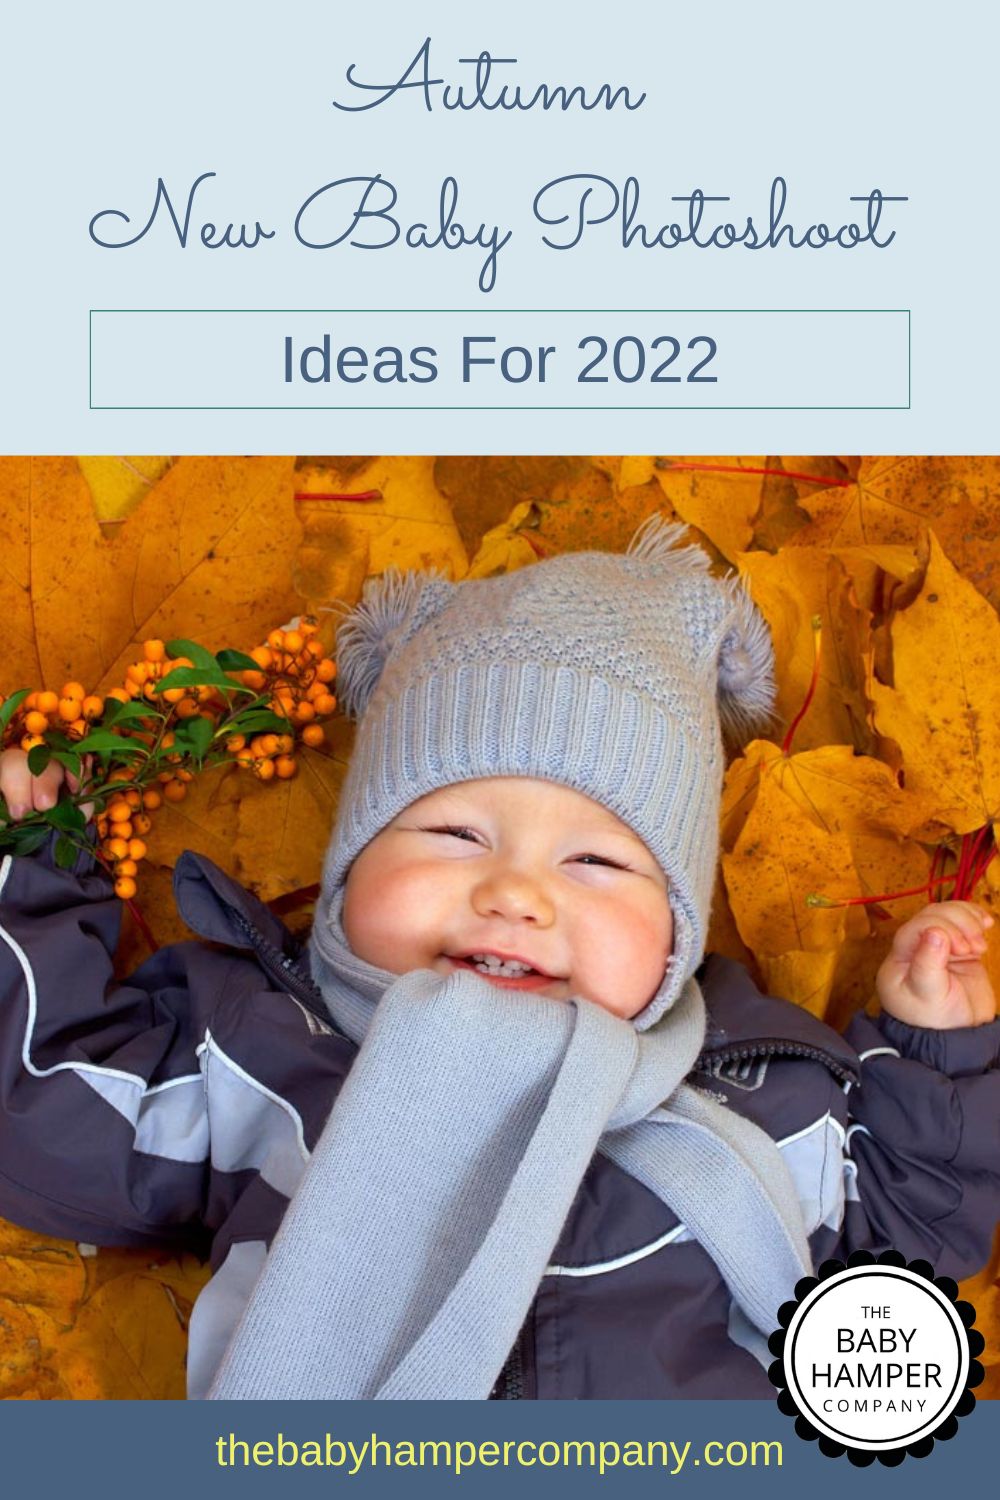 6 Must See Autumn New Baby Photoshoot Ideas For 2022